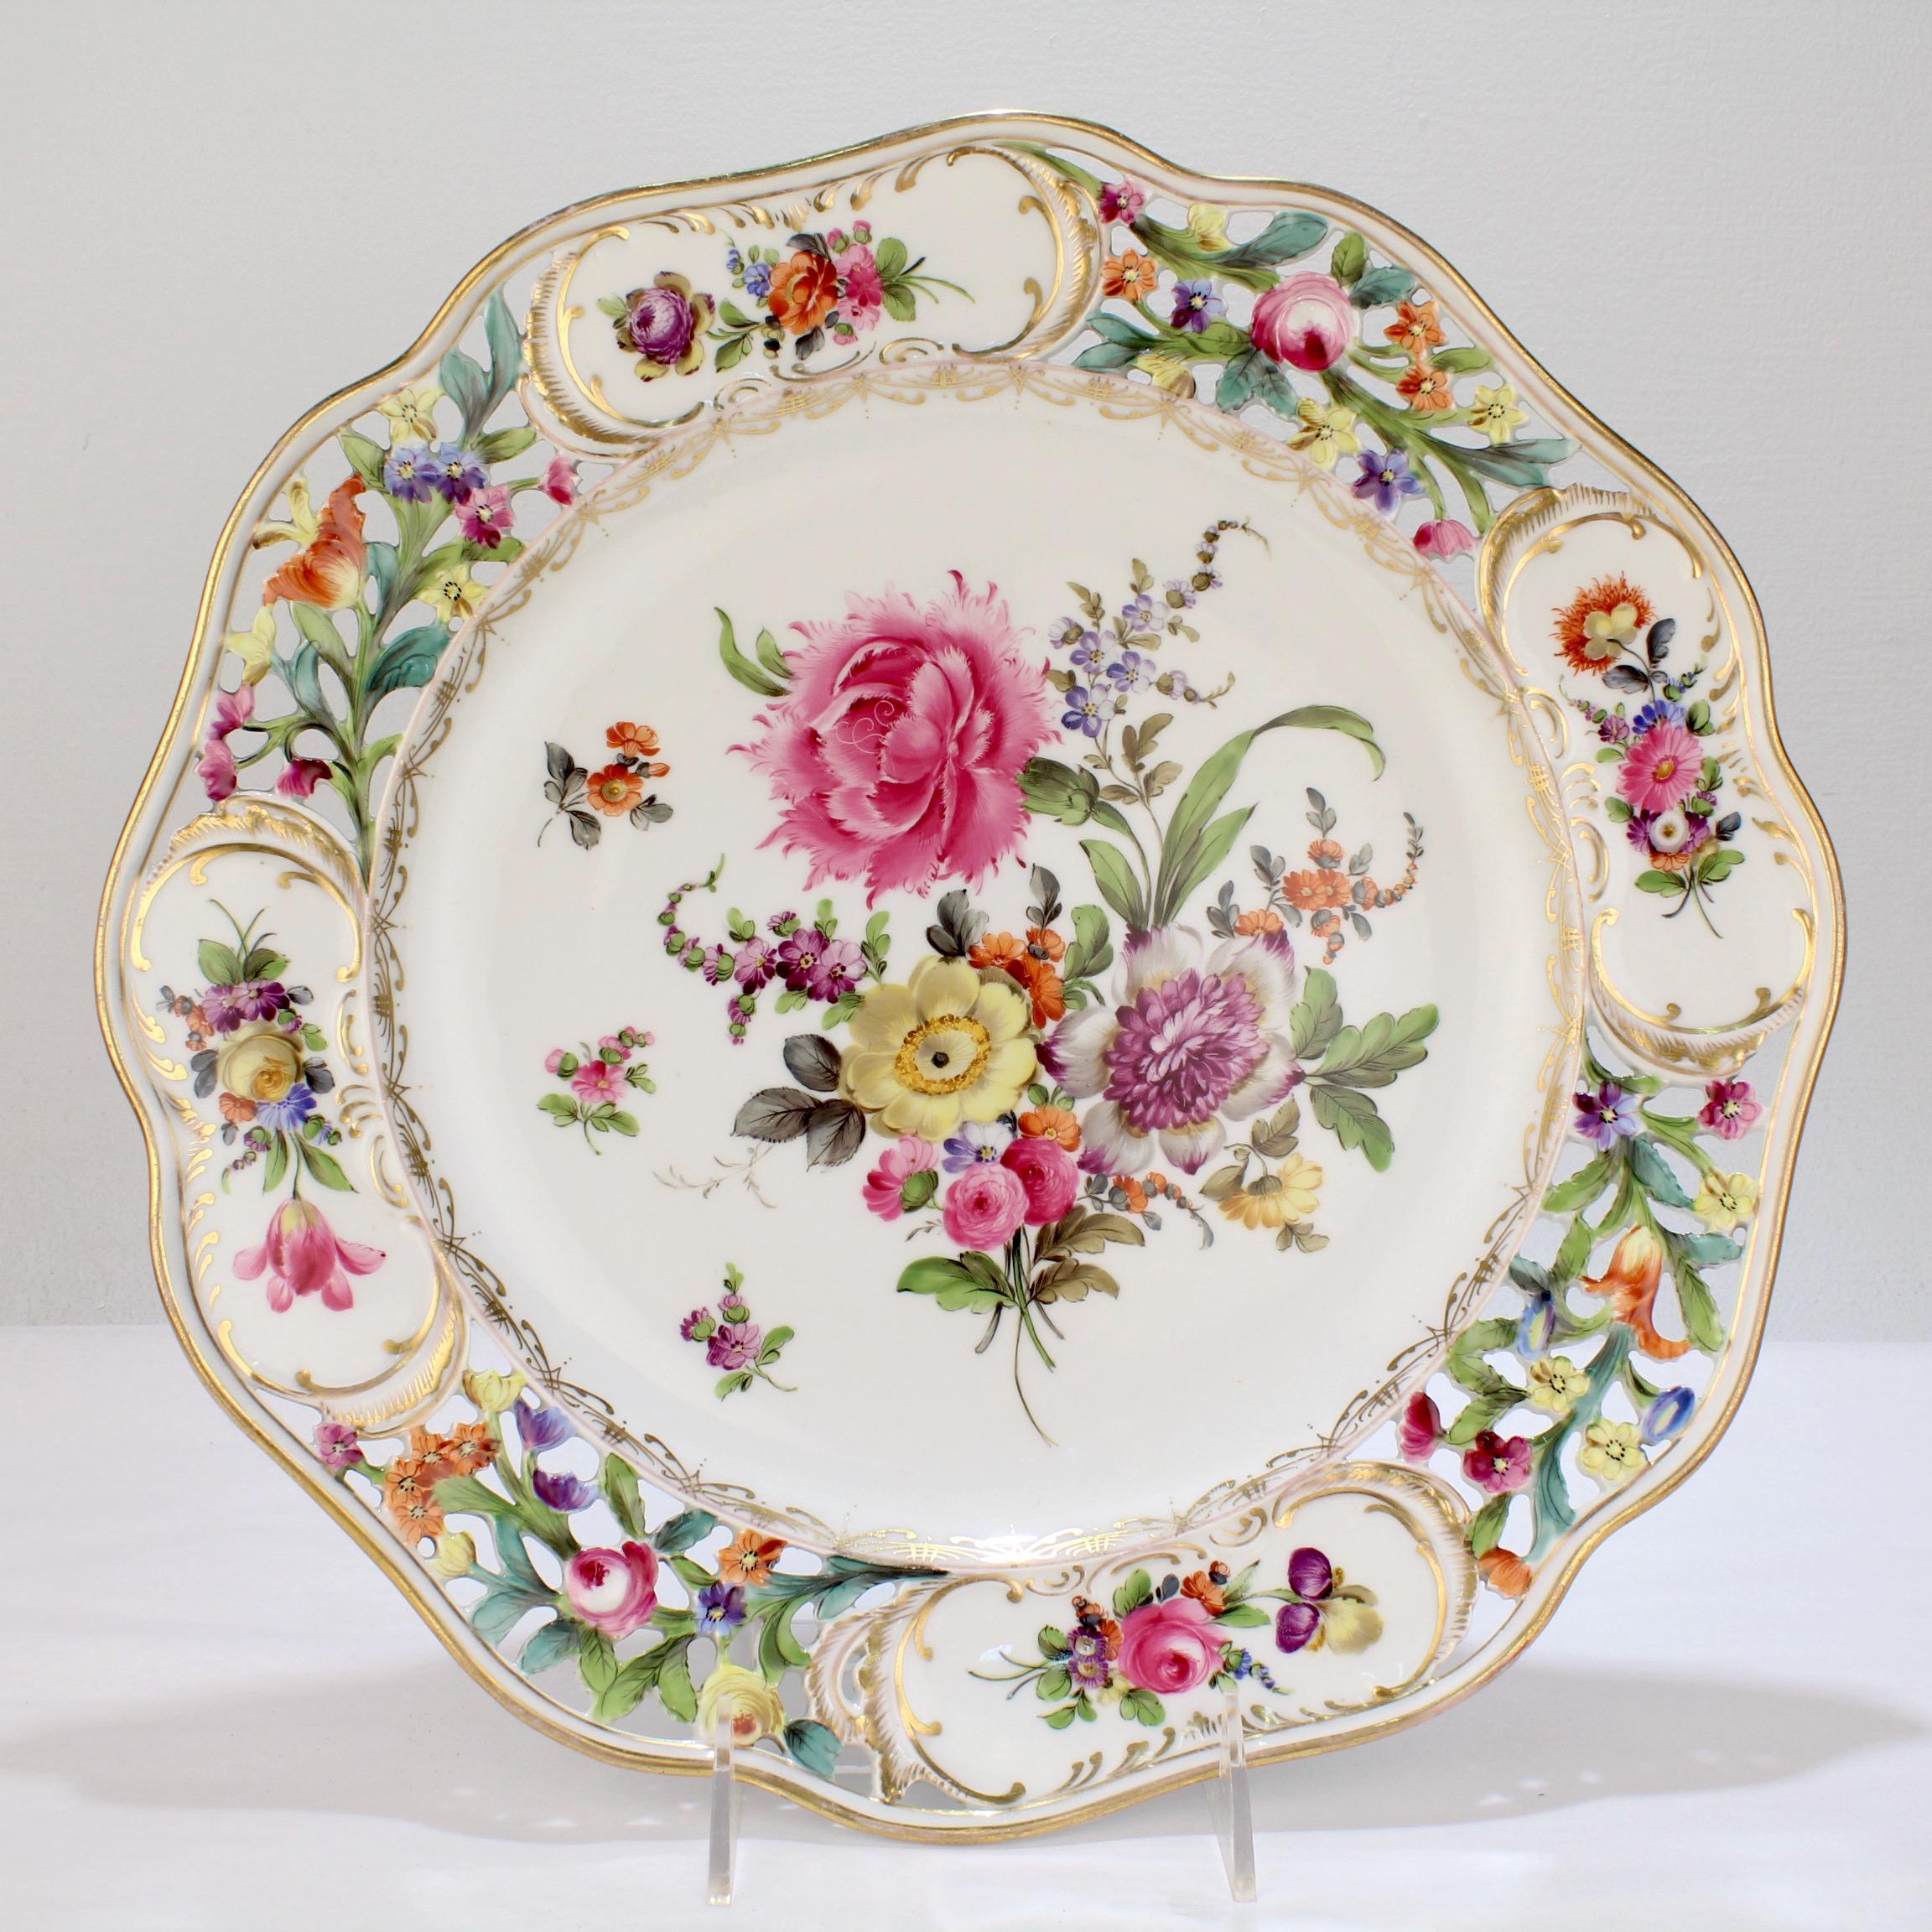 A fine large Dresden porcelain Charger by Potschnappel.

With a scalloped rim, a reticulated border with panels that have cartouches of flower garlands, and a center painted with a very large, finely hand painted spray of Deutsche Blumen